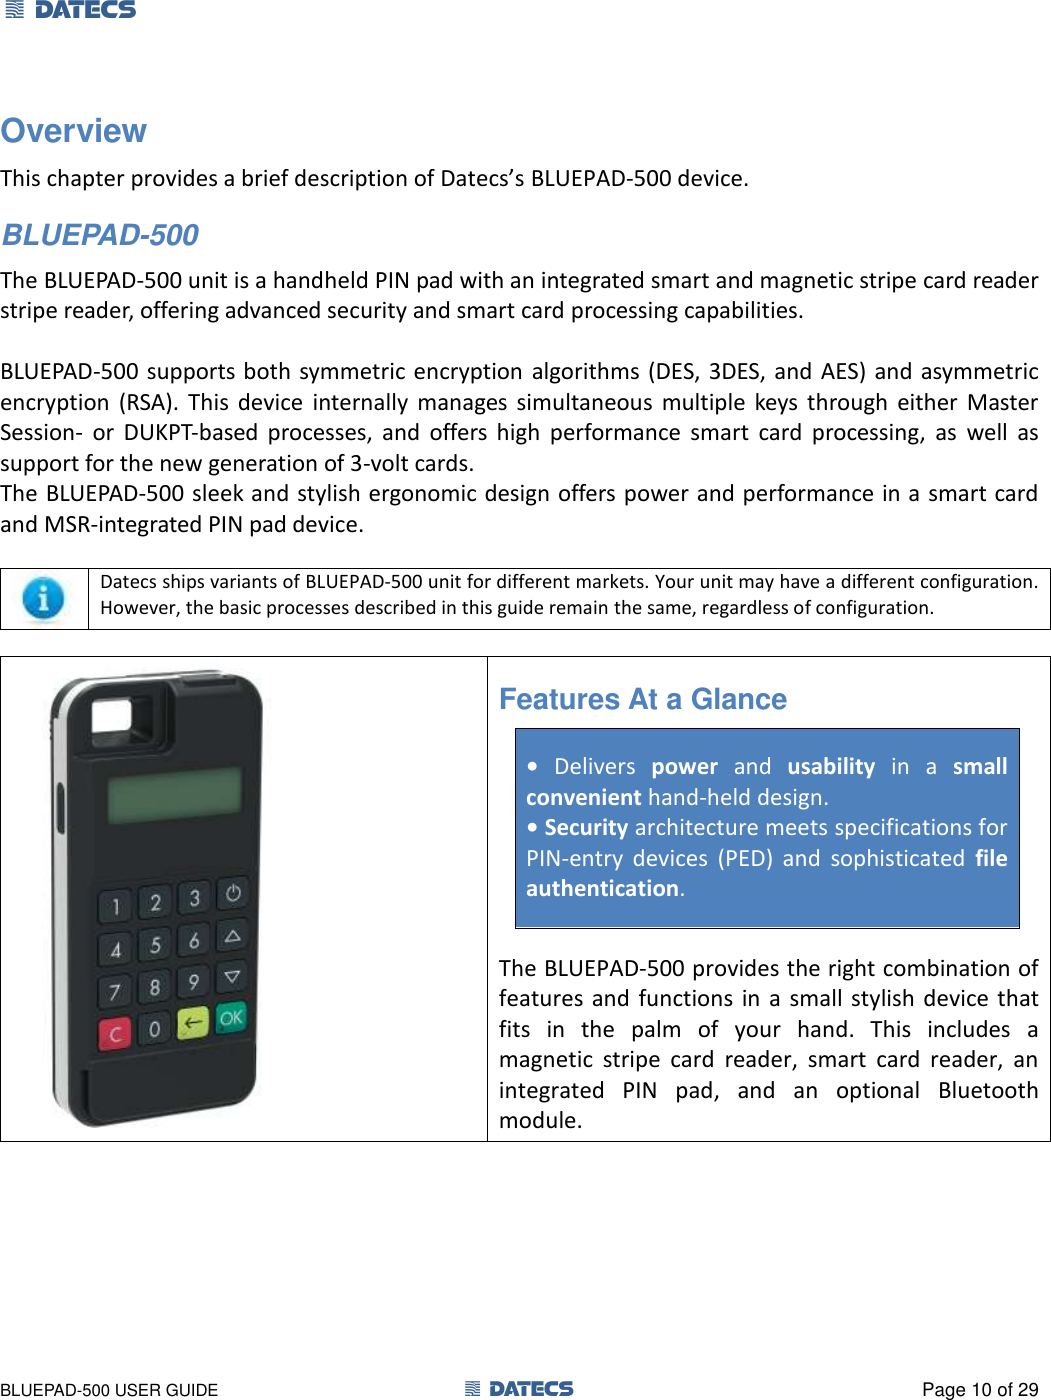 1 DATECS       BLUEPAD-500 USER GUIDE  1 DATECS  Page 10 of 29 Overview This chapter provides a brief description of Datecs’s BLUEPAD-500 device. BLUEPAD-500 The BLUEPAD-500 unit is a handheld PIN pad with an integrated smart and magnetic stripe card reader stripe reader, offering advanced security and smart card processing capabilities.  BLUEPAD-500 supports both symmetric encryption algorithms (DES, 3DES, and  AES) and asymmetric encryption  (RSA).  This  device  internally  manages  simultaneous  multiple  keys  through  either  Master Session-  or  DUKPT-based  processes,  and  offers  high  performance  smart  card  processing,  as  well  as support for the new generation of 3-volt cards. The BLUEPAD-500 sleek and stylish ergonomic design offers power and performance in a smart card and MSR-integrated PIN pad device.   Datecs ships variants of BLUEPAD-500 unit for different markets. Your unit may have a different configuration. However, the basic processes described in this guide remain the same, regardless of configuration.   Features At a Glance  • Delivers  power  and  usability  in  a  small  convenient hand-held design. • Security architecture meets specifications for PIN-entry  devices  (PED)  and  sophisticated  file authentication.   The BLUEPAD-500 provides the right combination of features  and  functions in a  small  stylish device that fits  in  the  palm  of  your  hand.  This  includes  a magnetic  stripe  card  reader,  smart  card  reader,  an integrated  PIN  pad,  and  an  optional  Bluetooth module.  